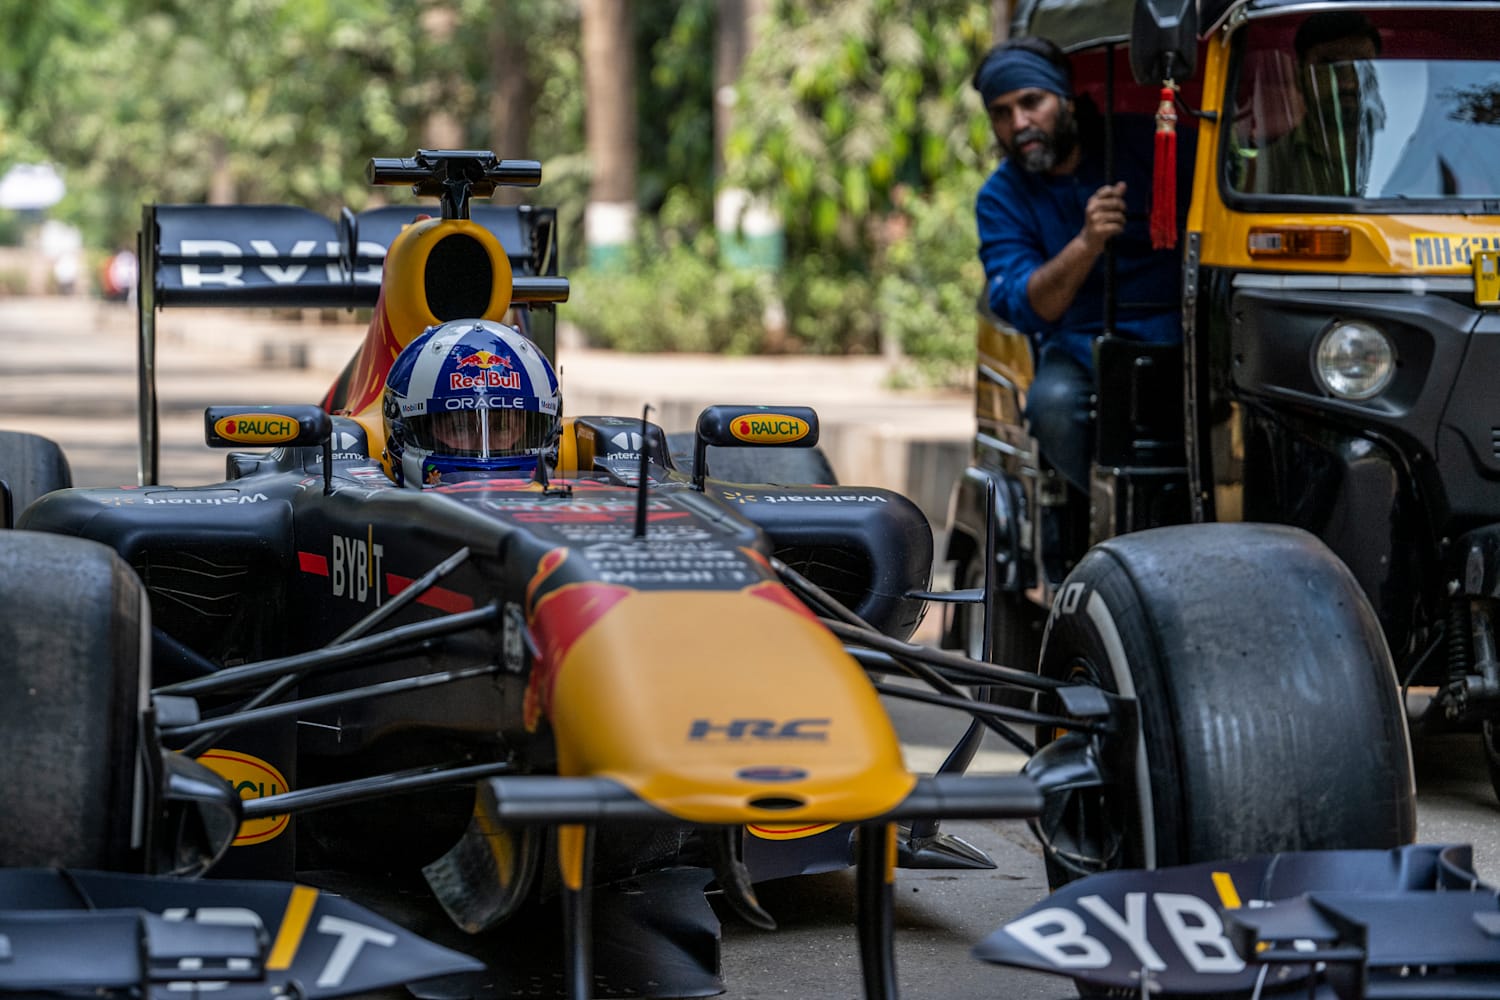 How Formula One is zooming in popularity in India